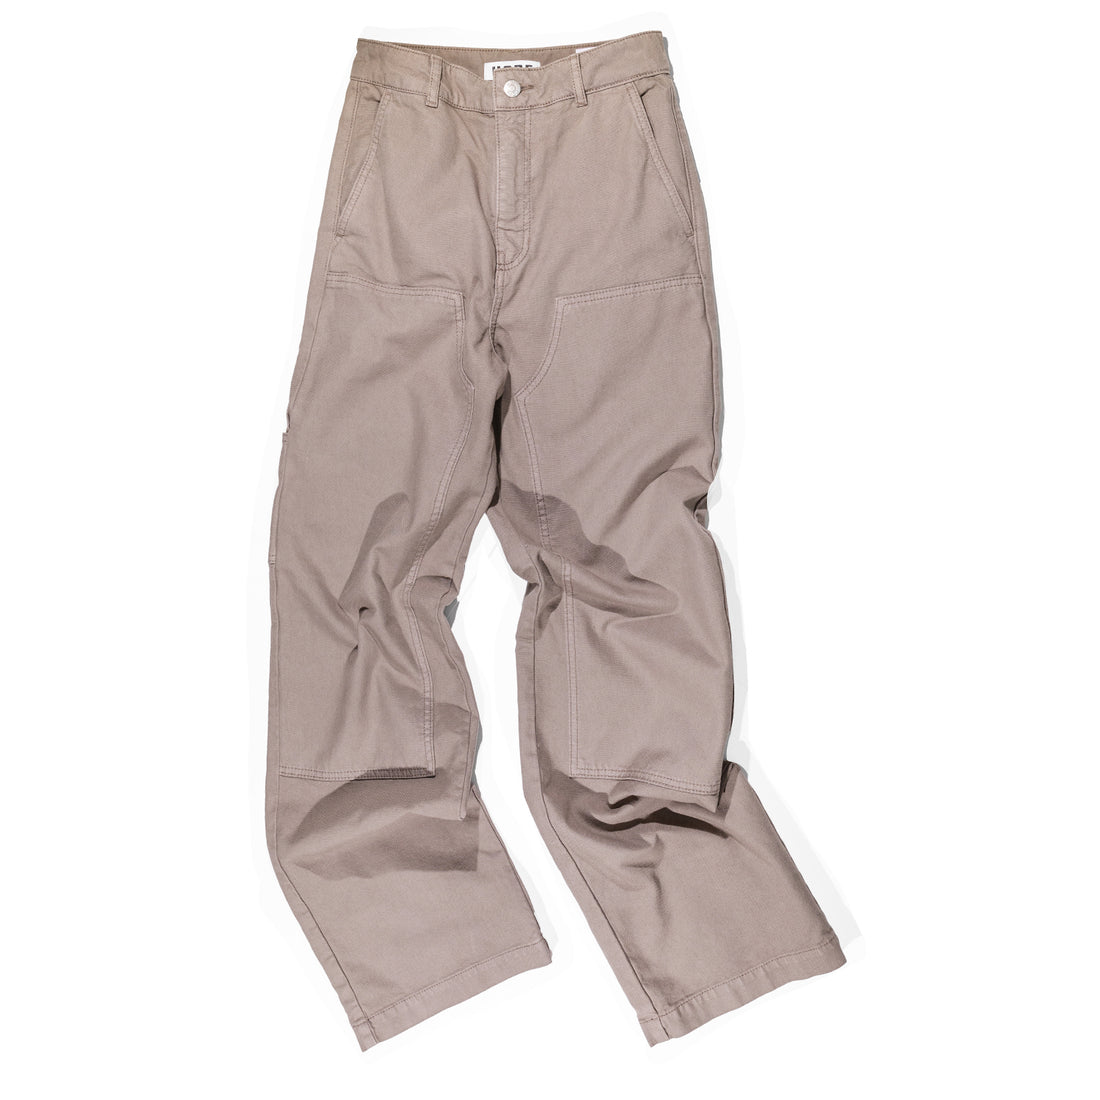 Hope Makers Trousers in Beige Heavy Cotton